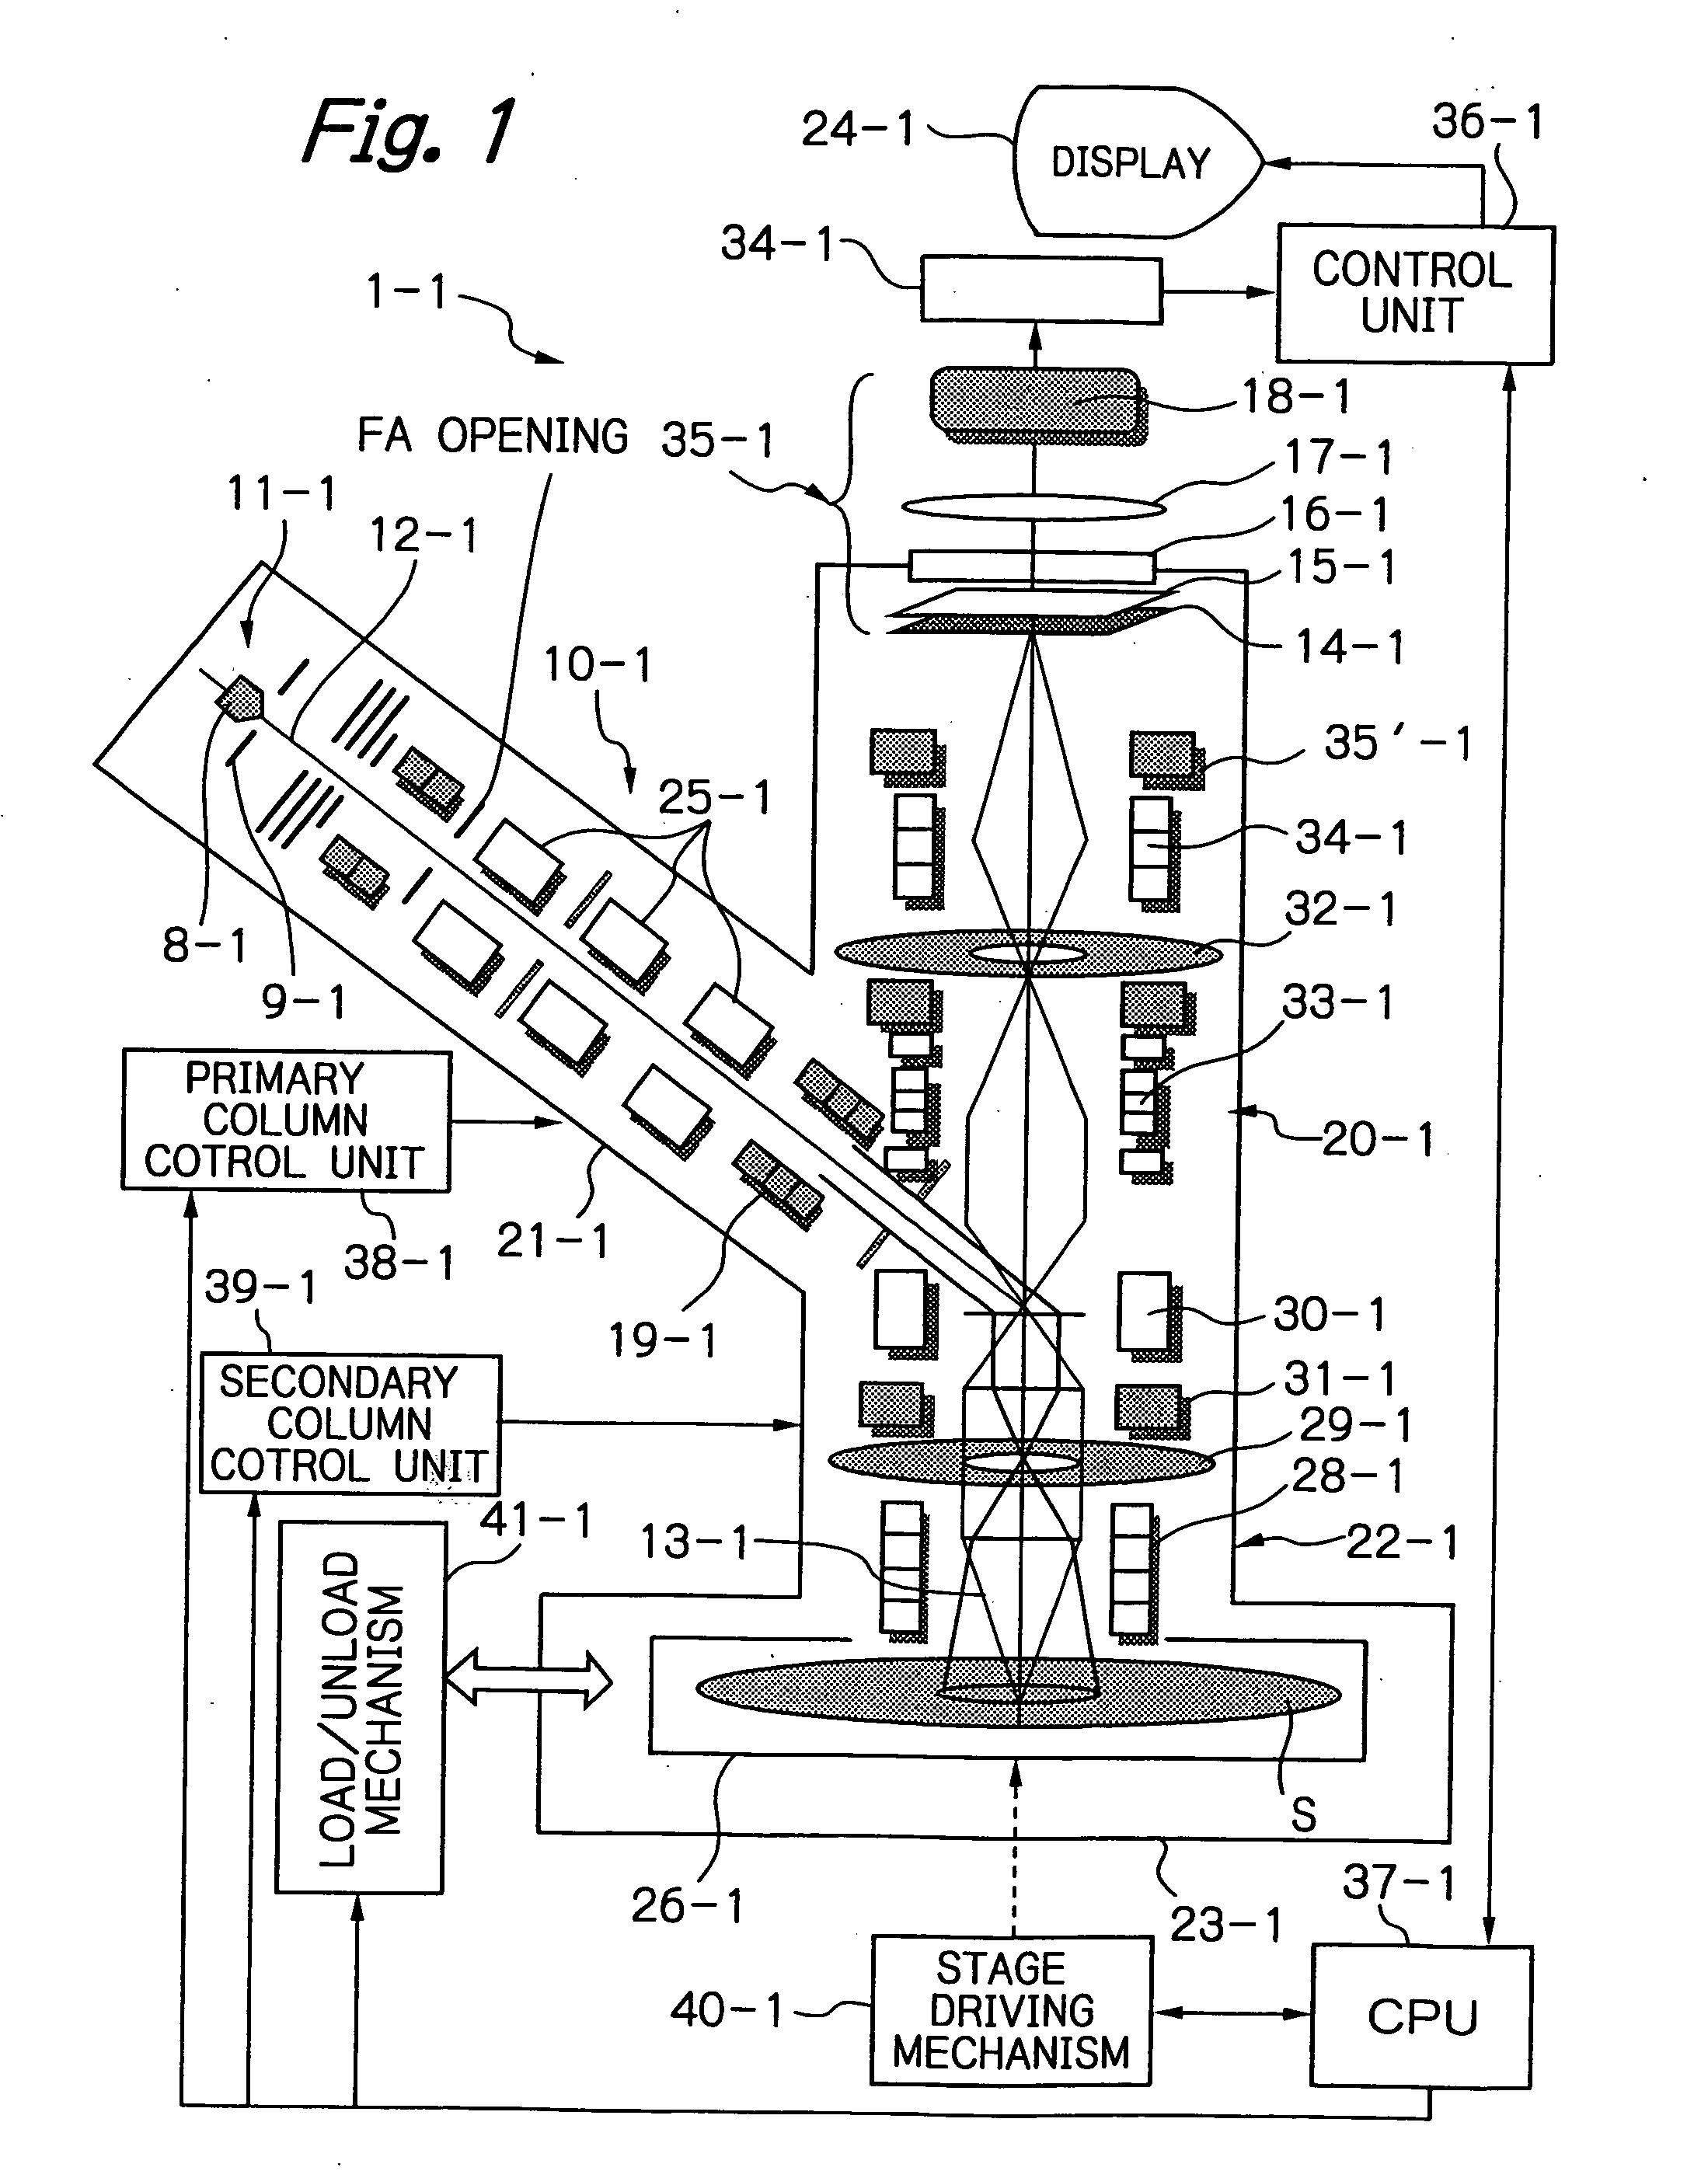 Apparatus for inspection with electron beam, method for operating same, and method for manufacturing semiconductor device using former